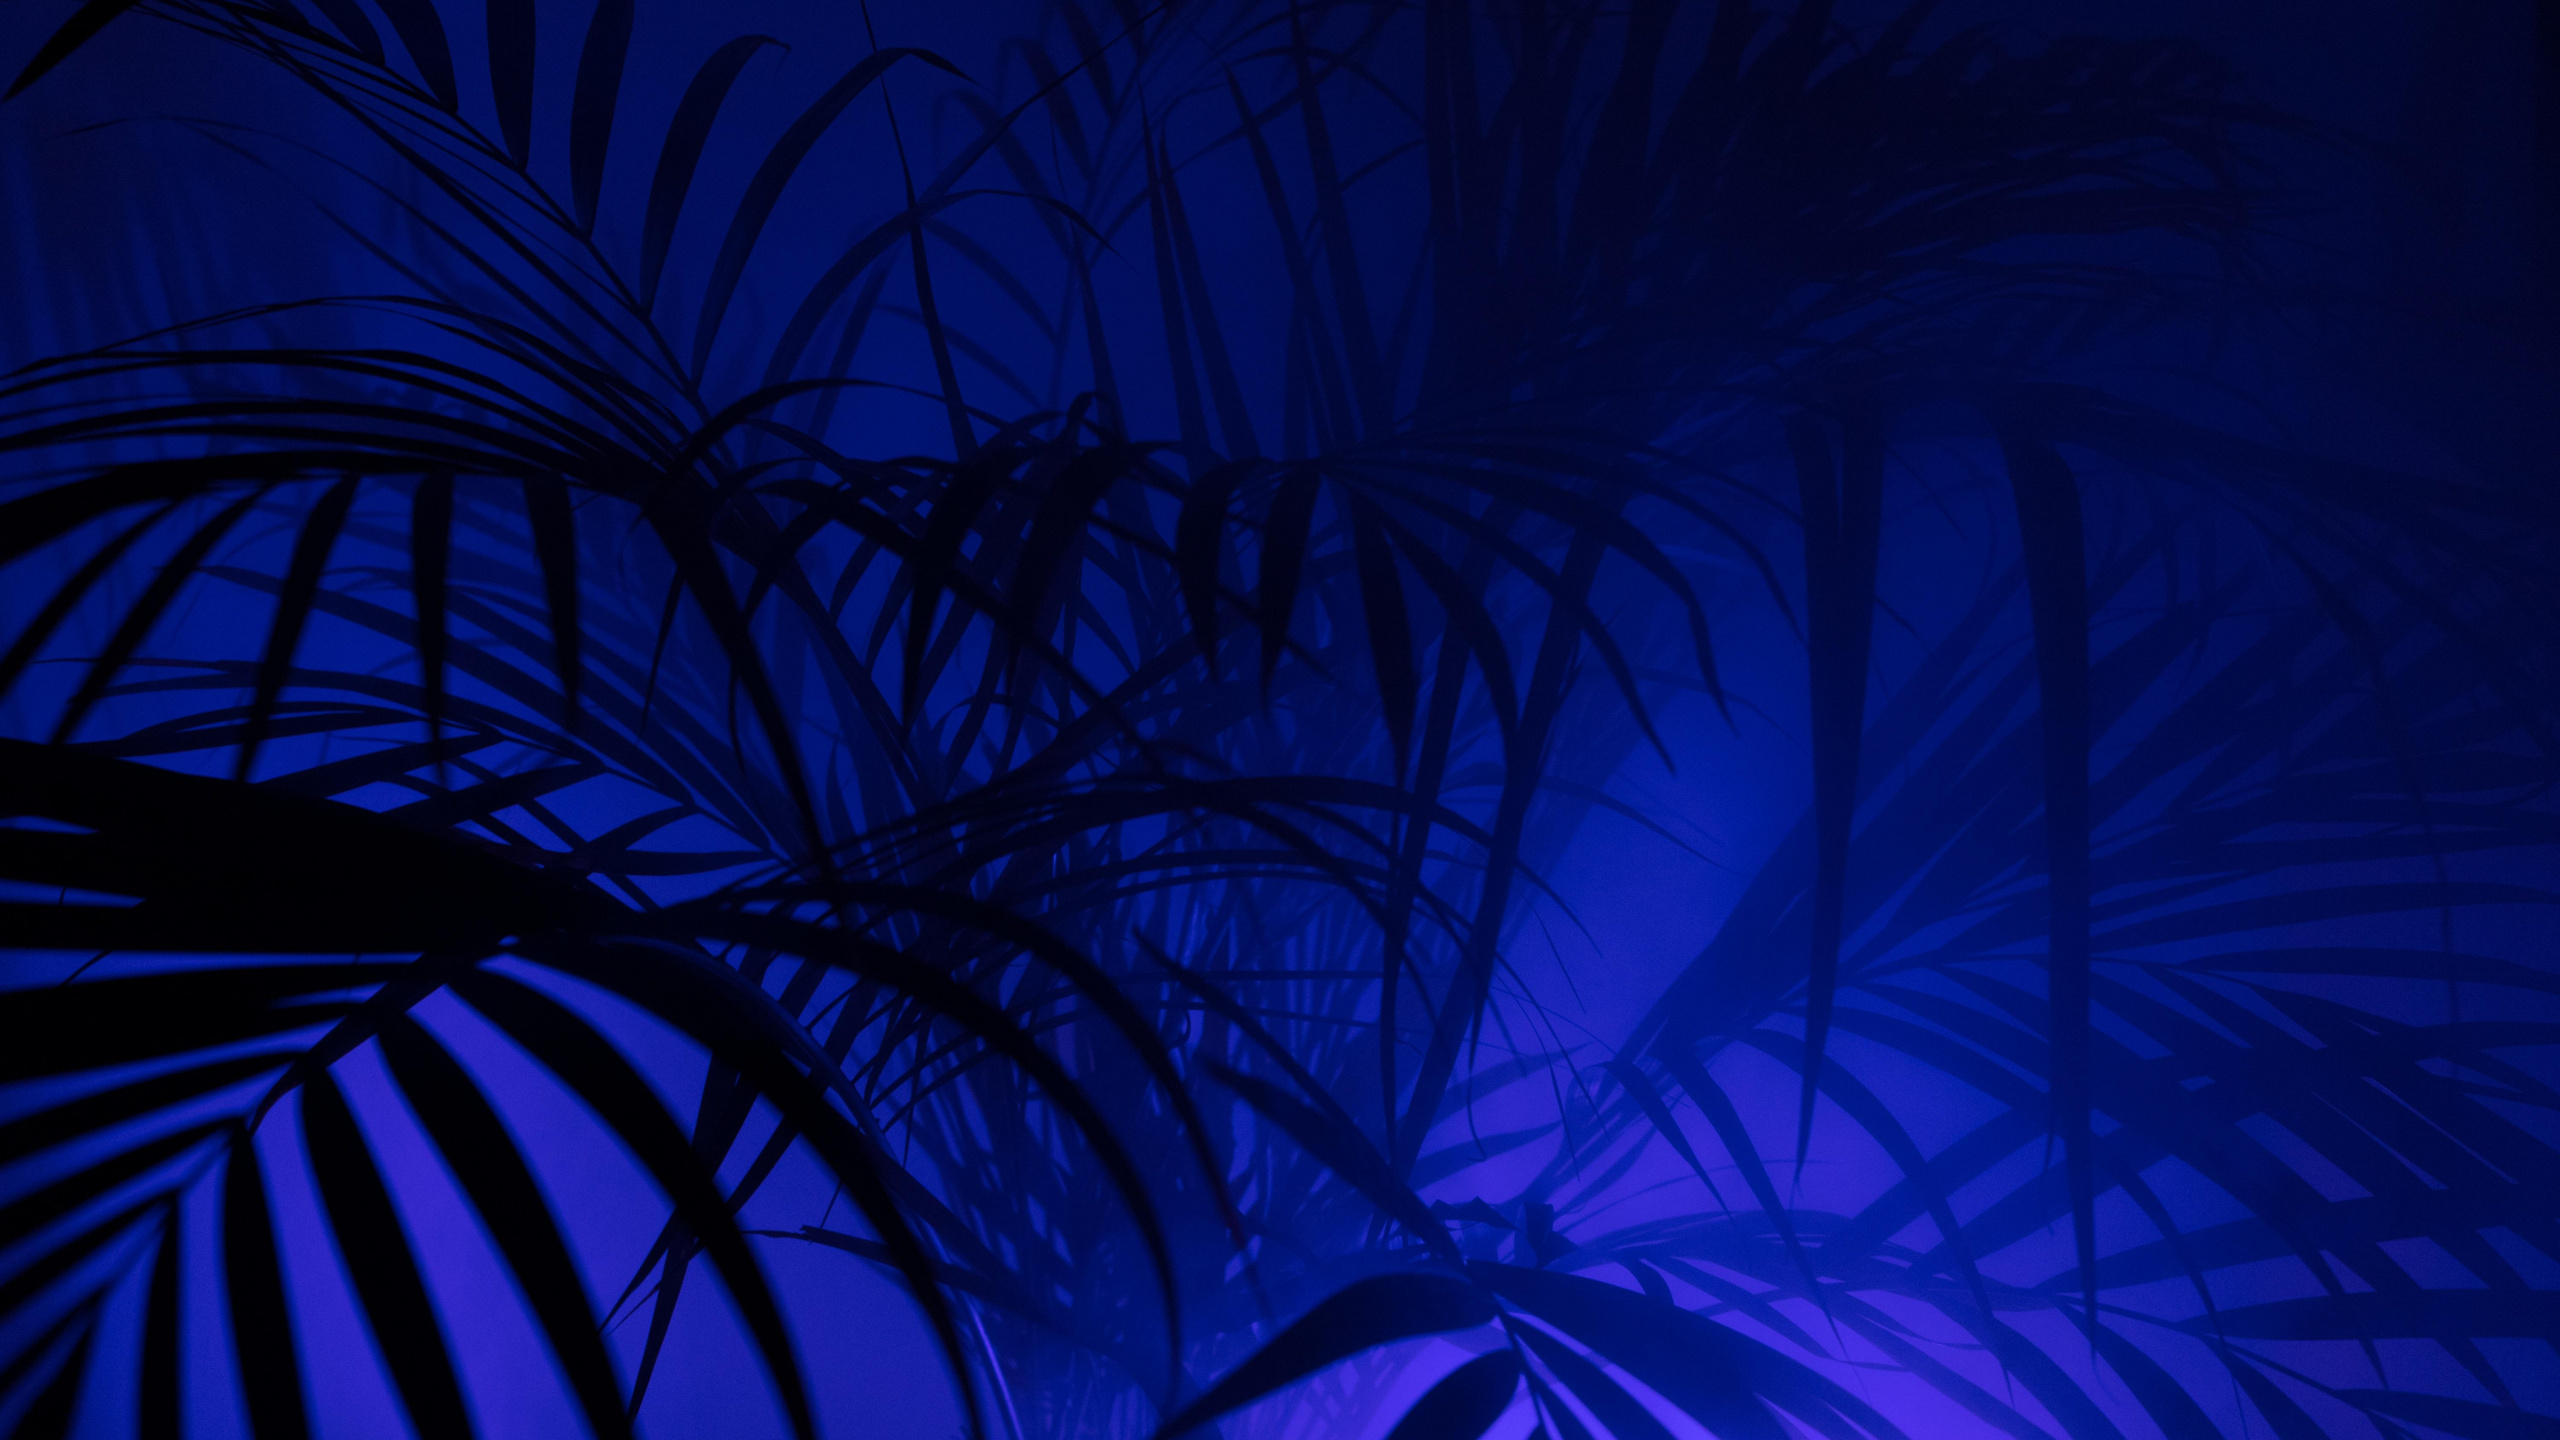 Green Plant in Blue Background. Wallpaper in 2560x1440 Resolution